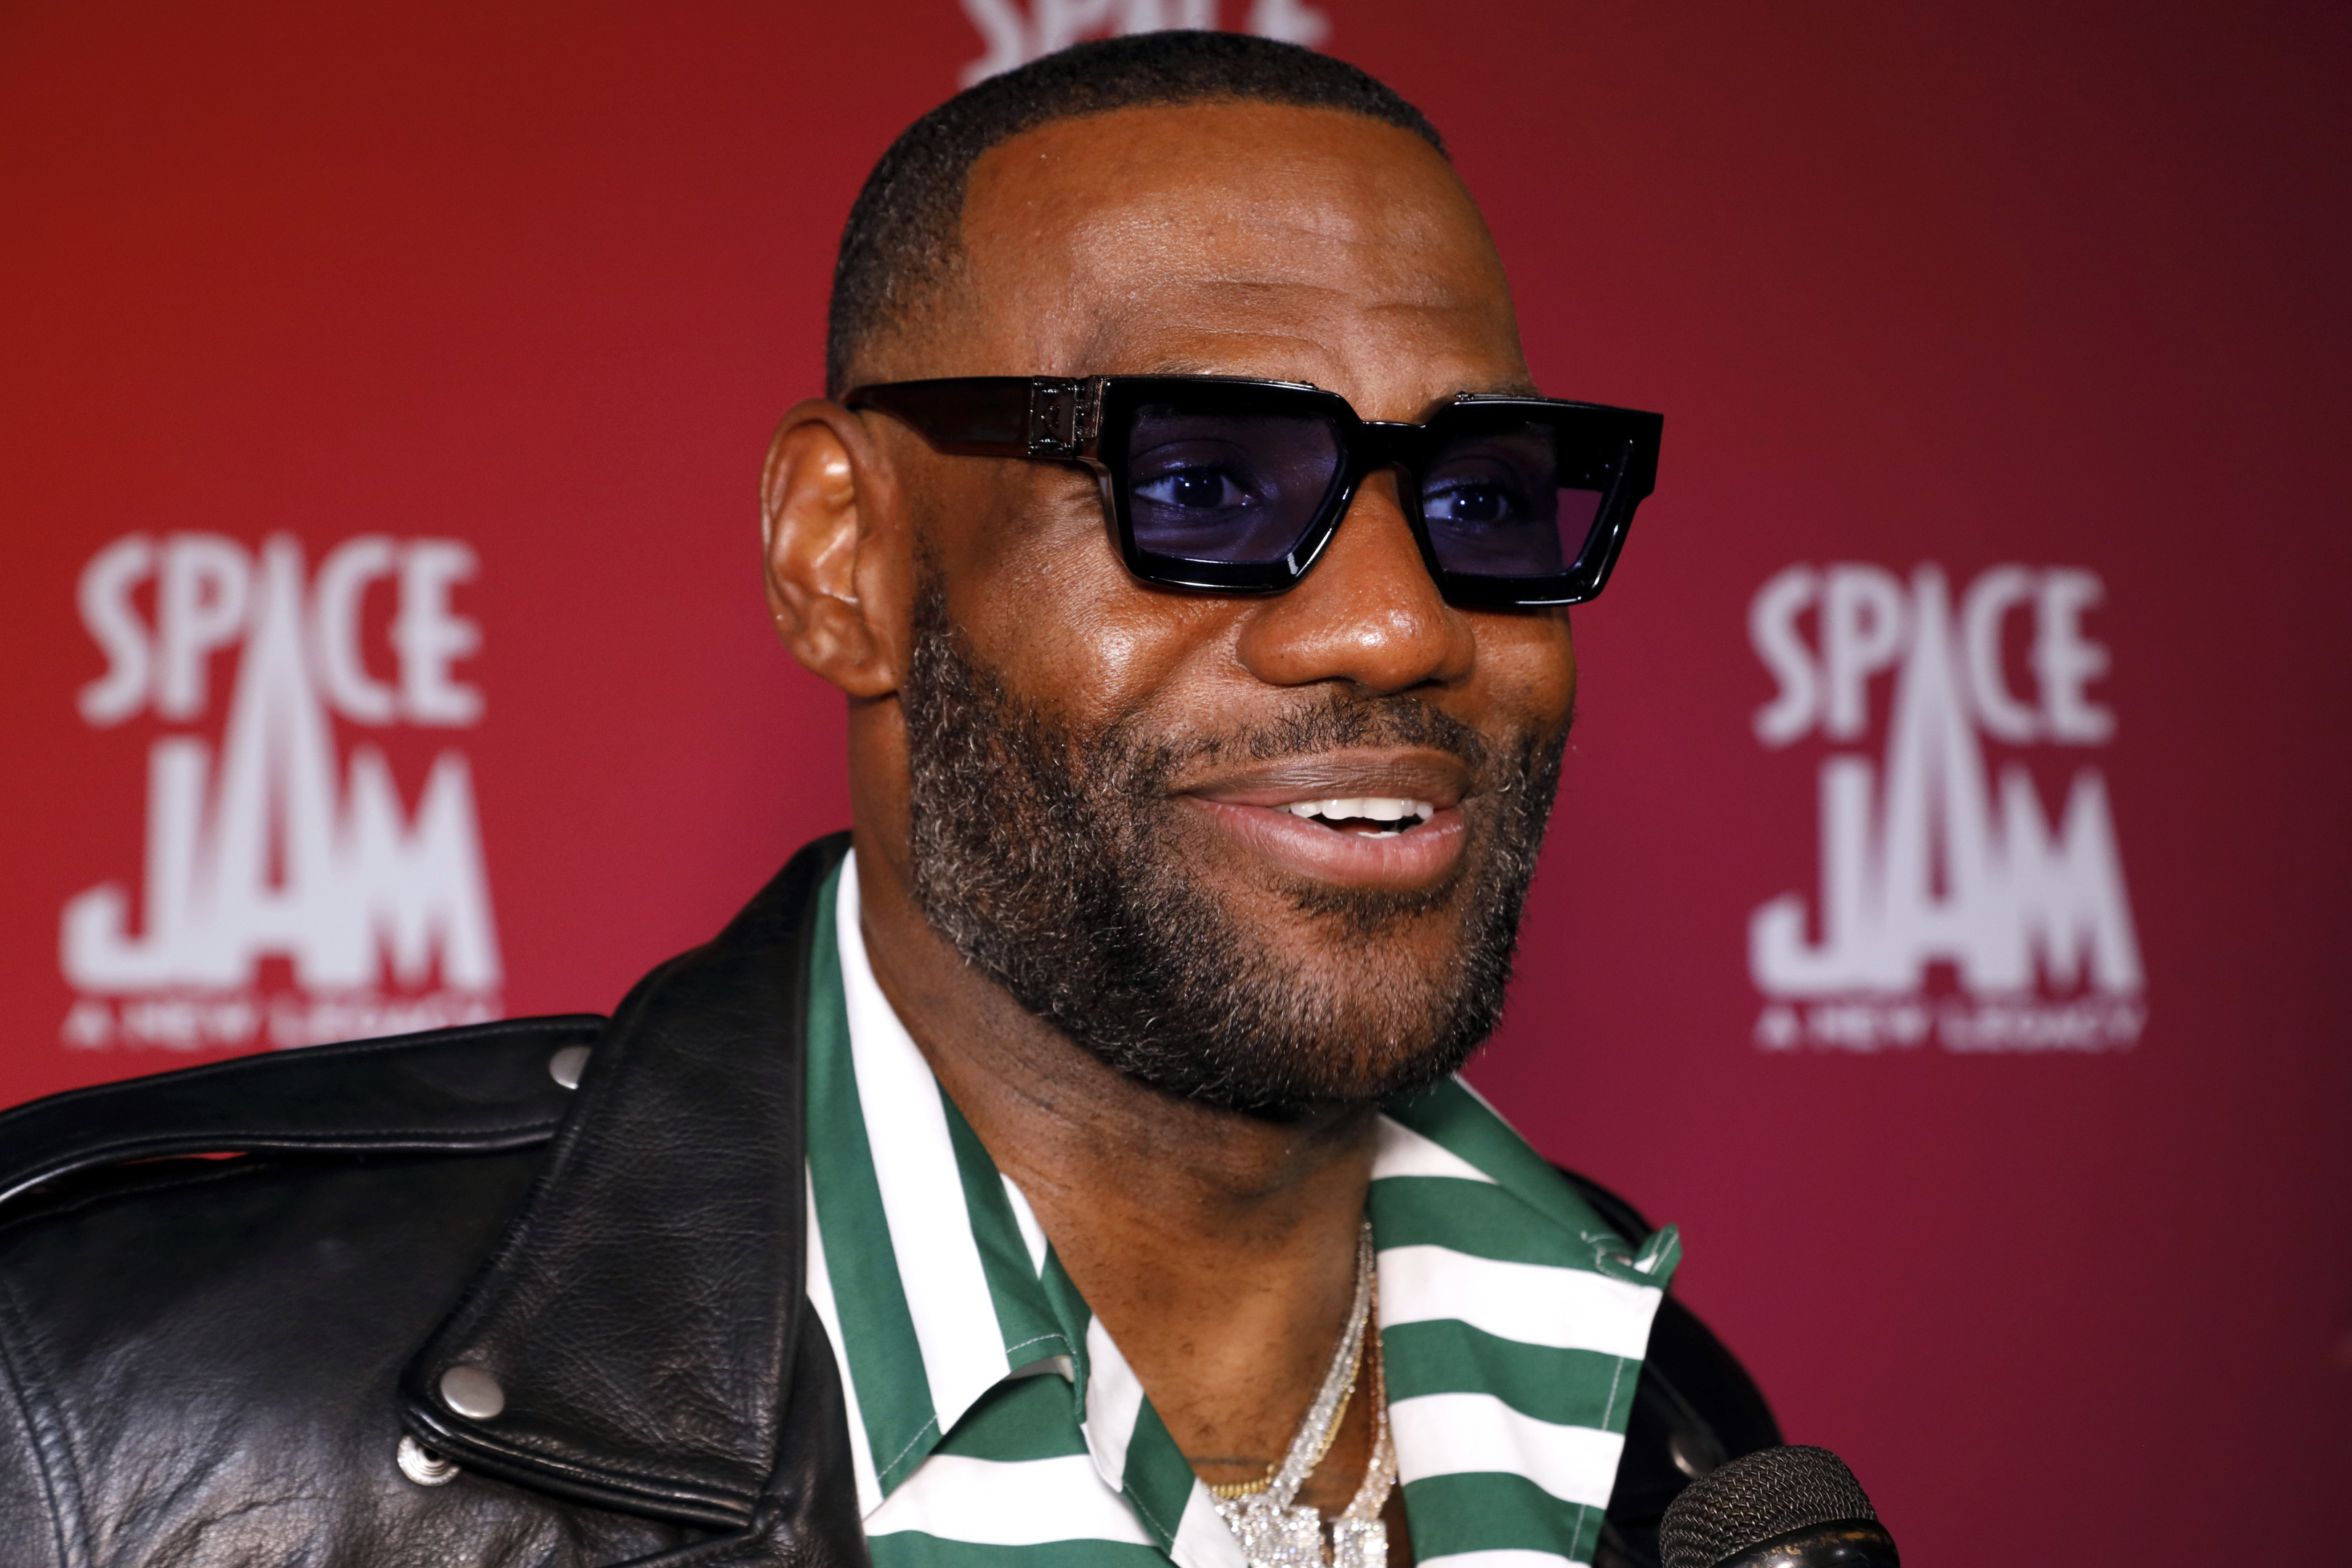 LeBron James Reigns Supreme with New 'Fortnite' Skin – The Nerds of Color